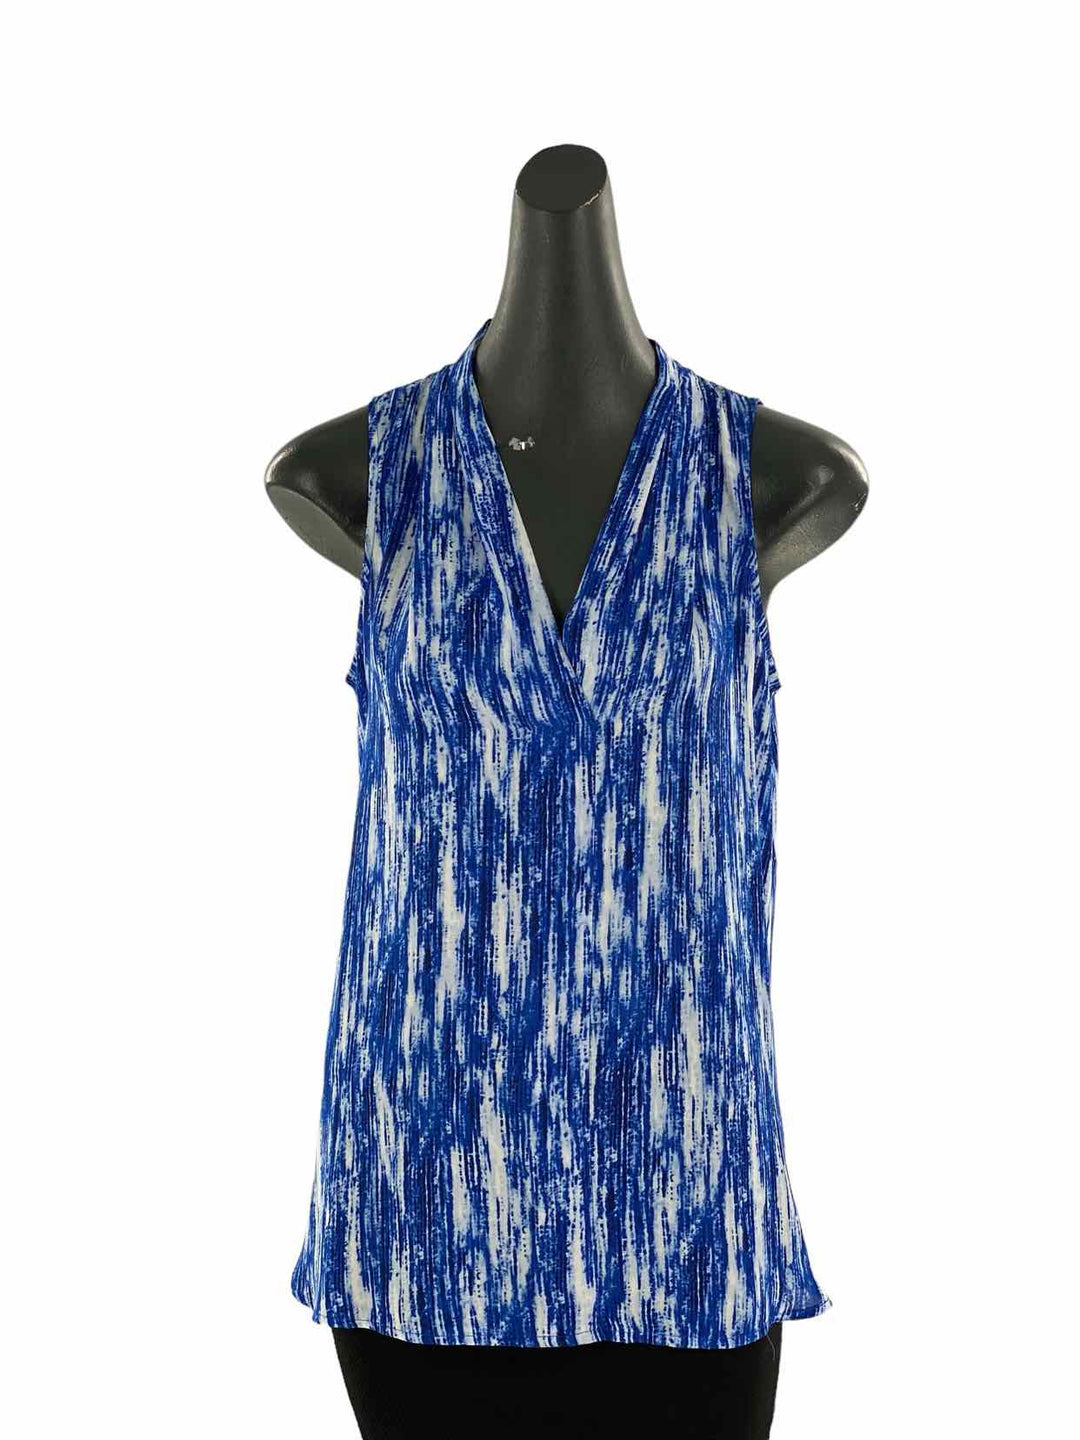 Vince Camuto Size S Blue White Streaks Tank Top